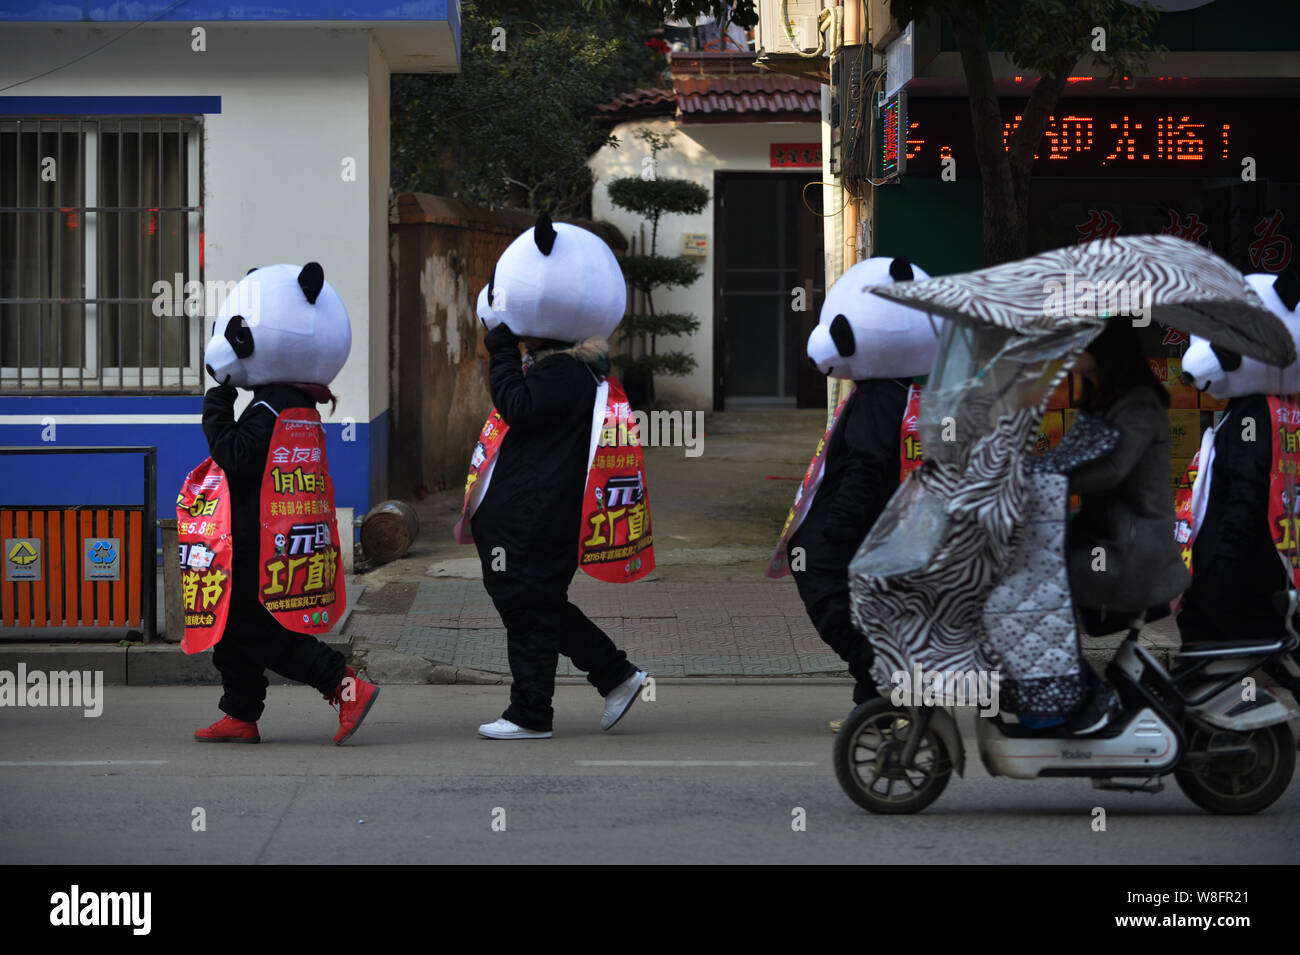 Chinese promoters of a merchant dressed in panda costumes in the street to welcome New Year in Xuancheng city, east China's Anhui province, 29 Decembe Stock Photo